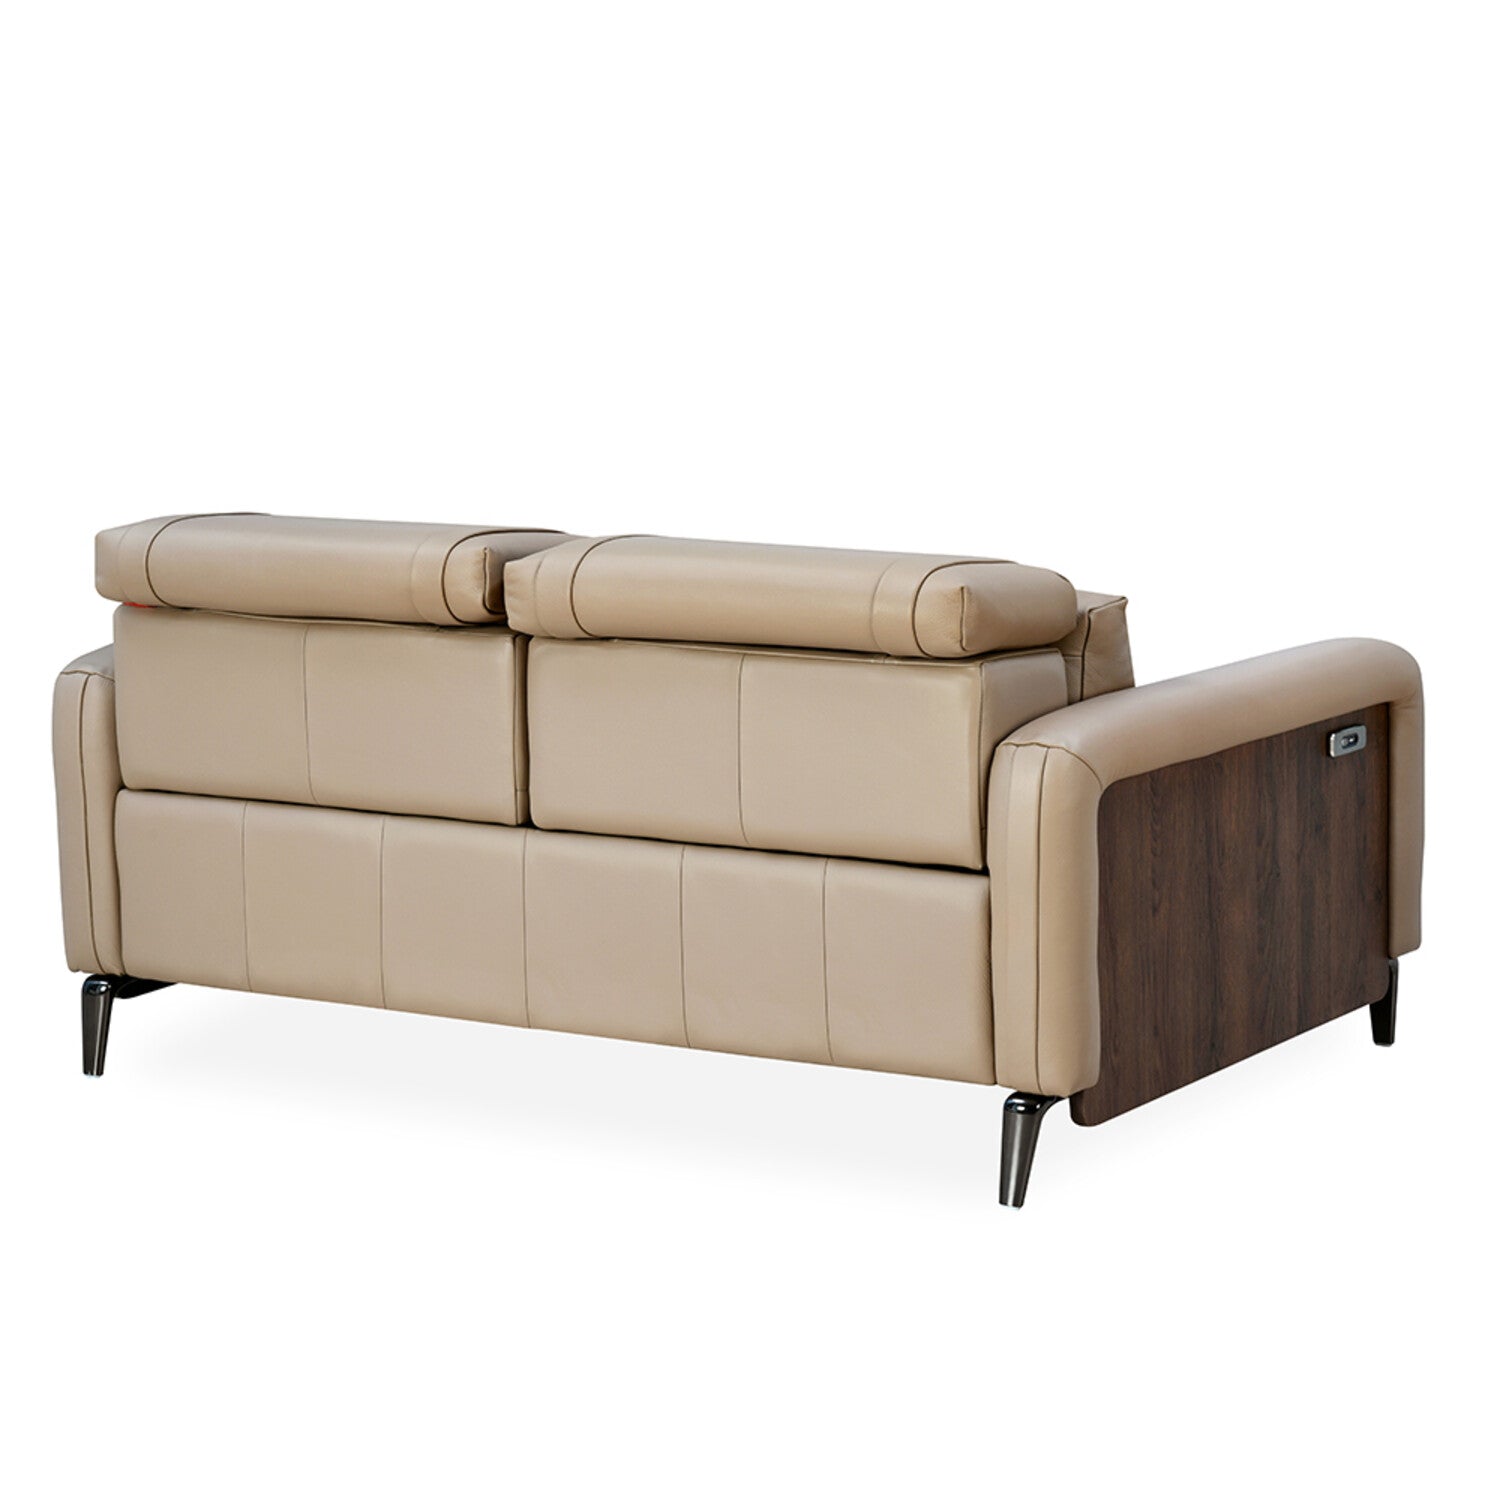 Olimpio 3 Seater Leather Electric Recliner (Beige)